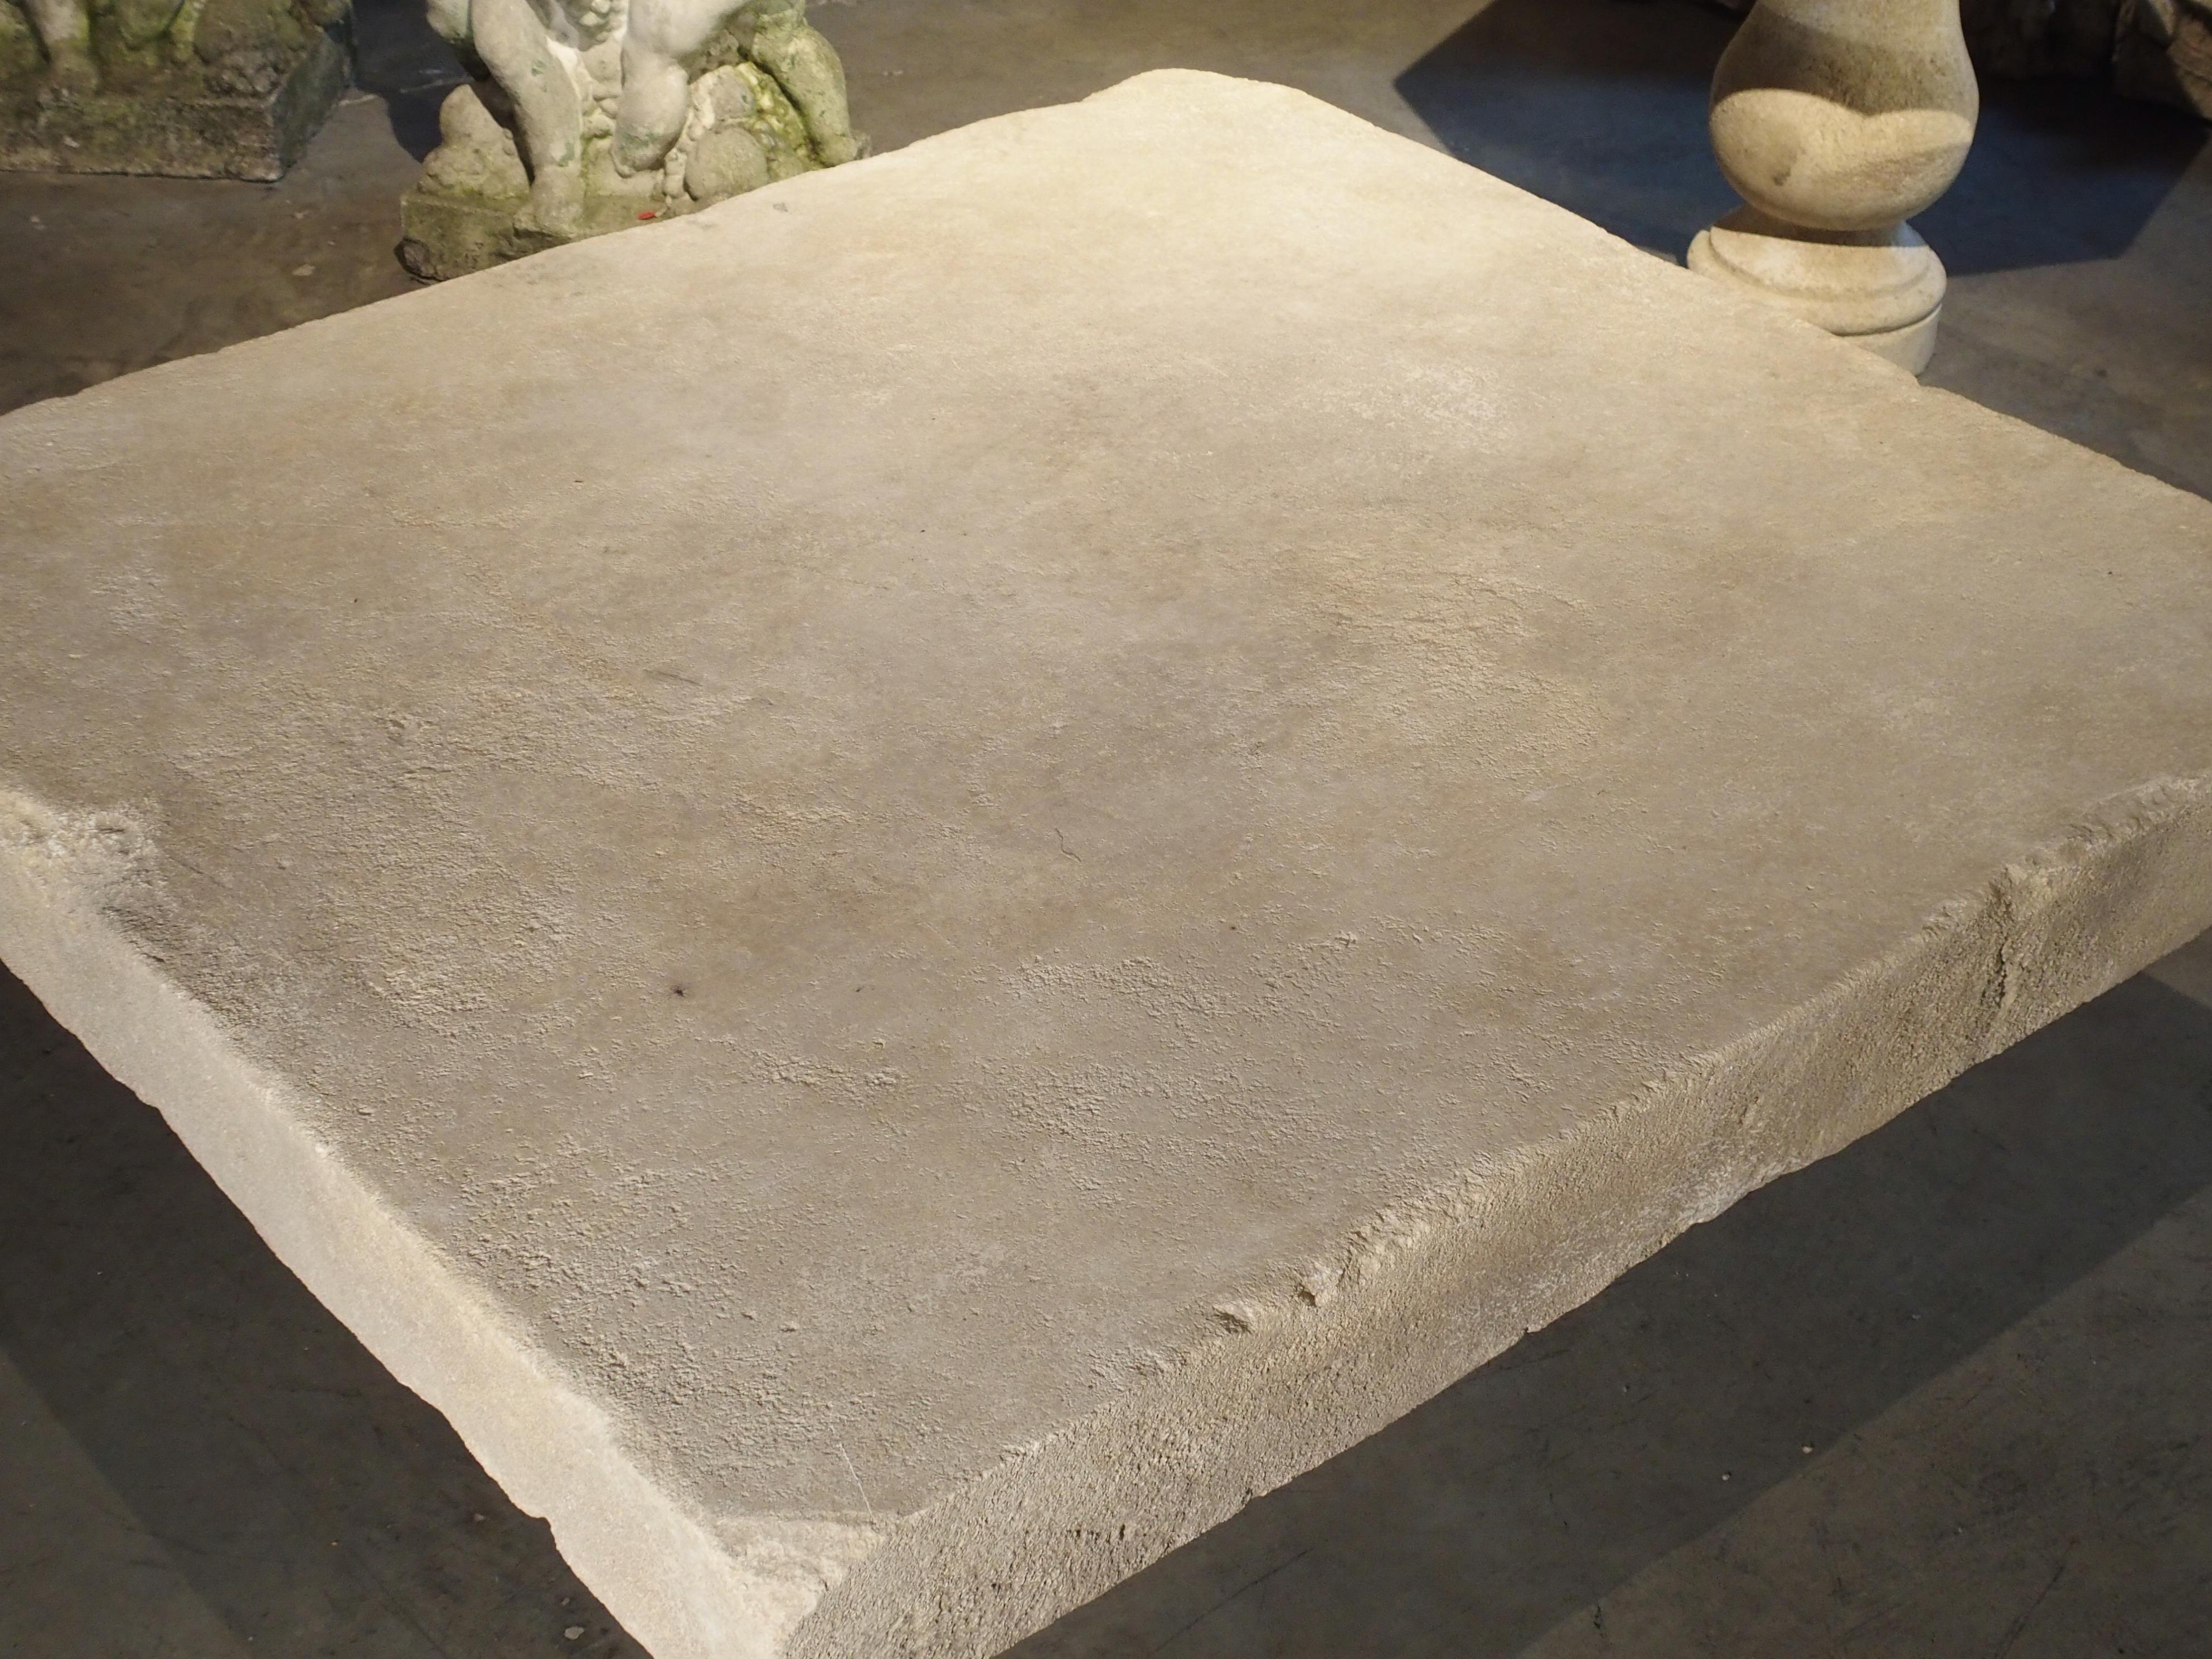 This versatile coffee table from the South of France has been carved from the famous Estaillade stone of Provence. The top slab is made from one thick piece of limestone, and the base also made from one big block. This table can be used with any